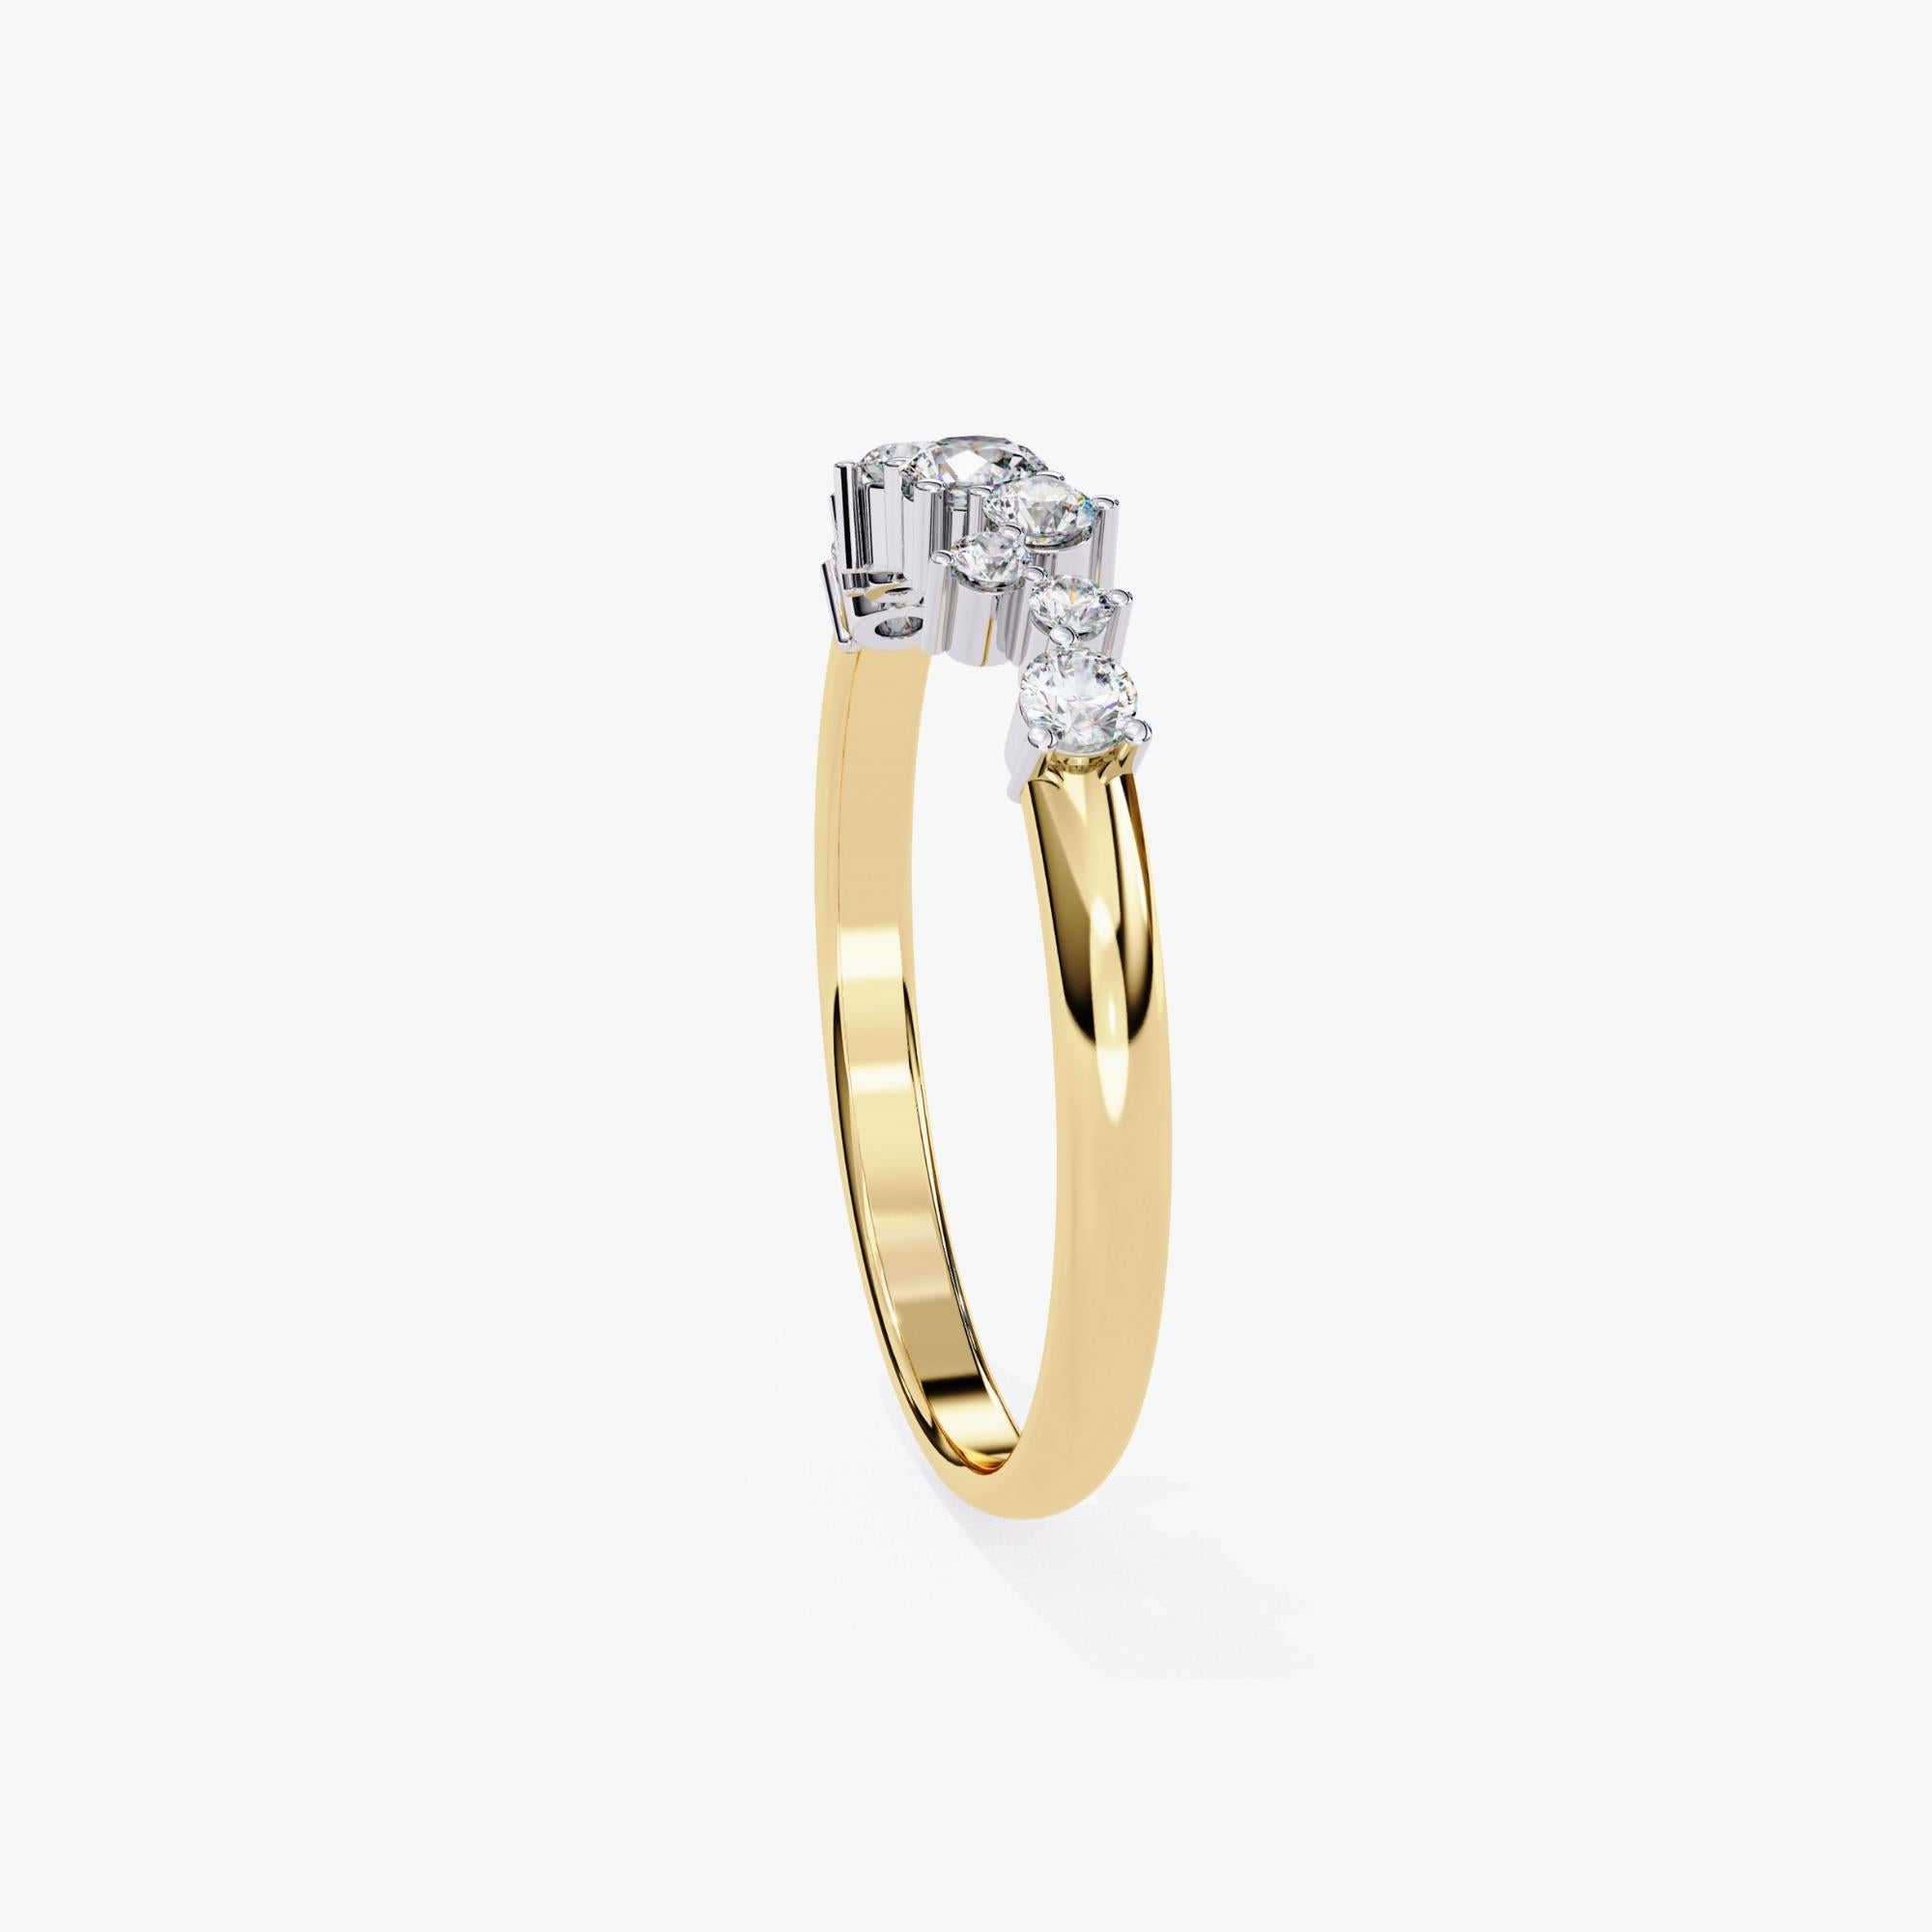 0.27 carat Diamond, 14K Gold Star, Constellation Ring In New Condition For Sale In New York, NY